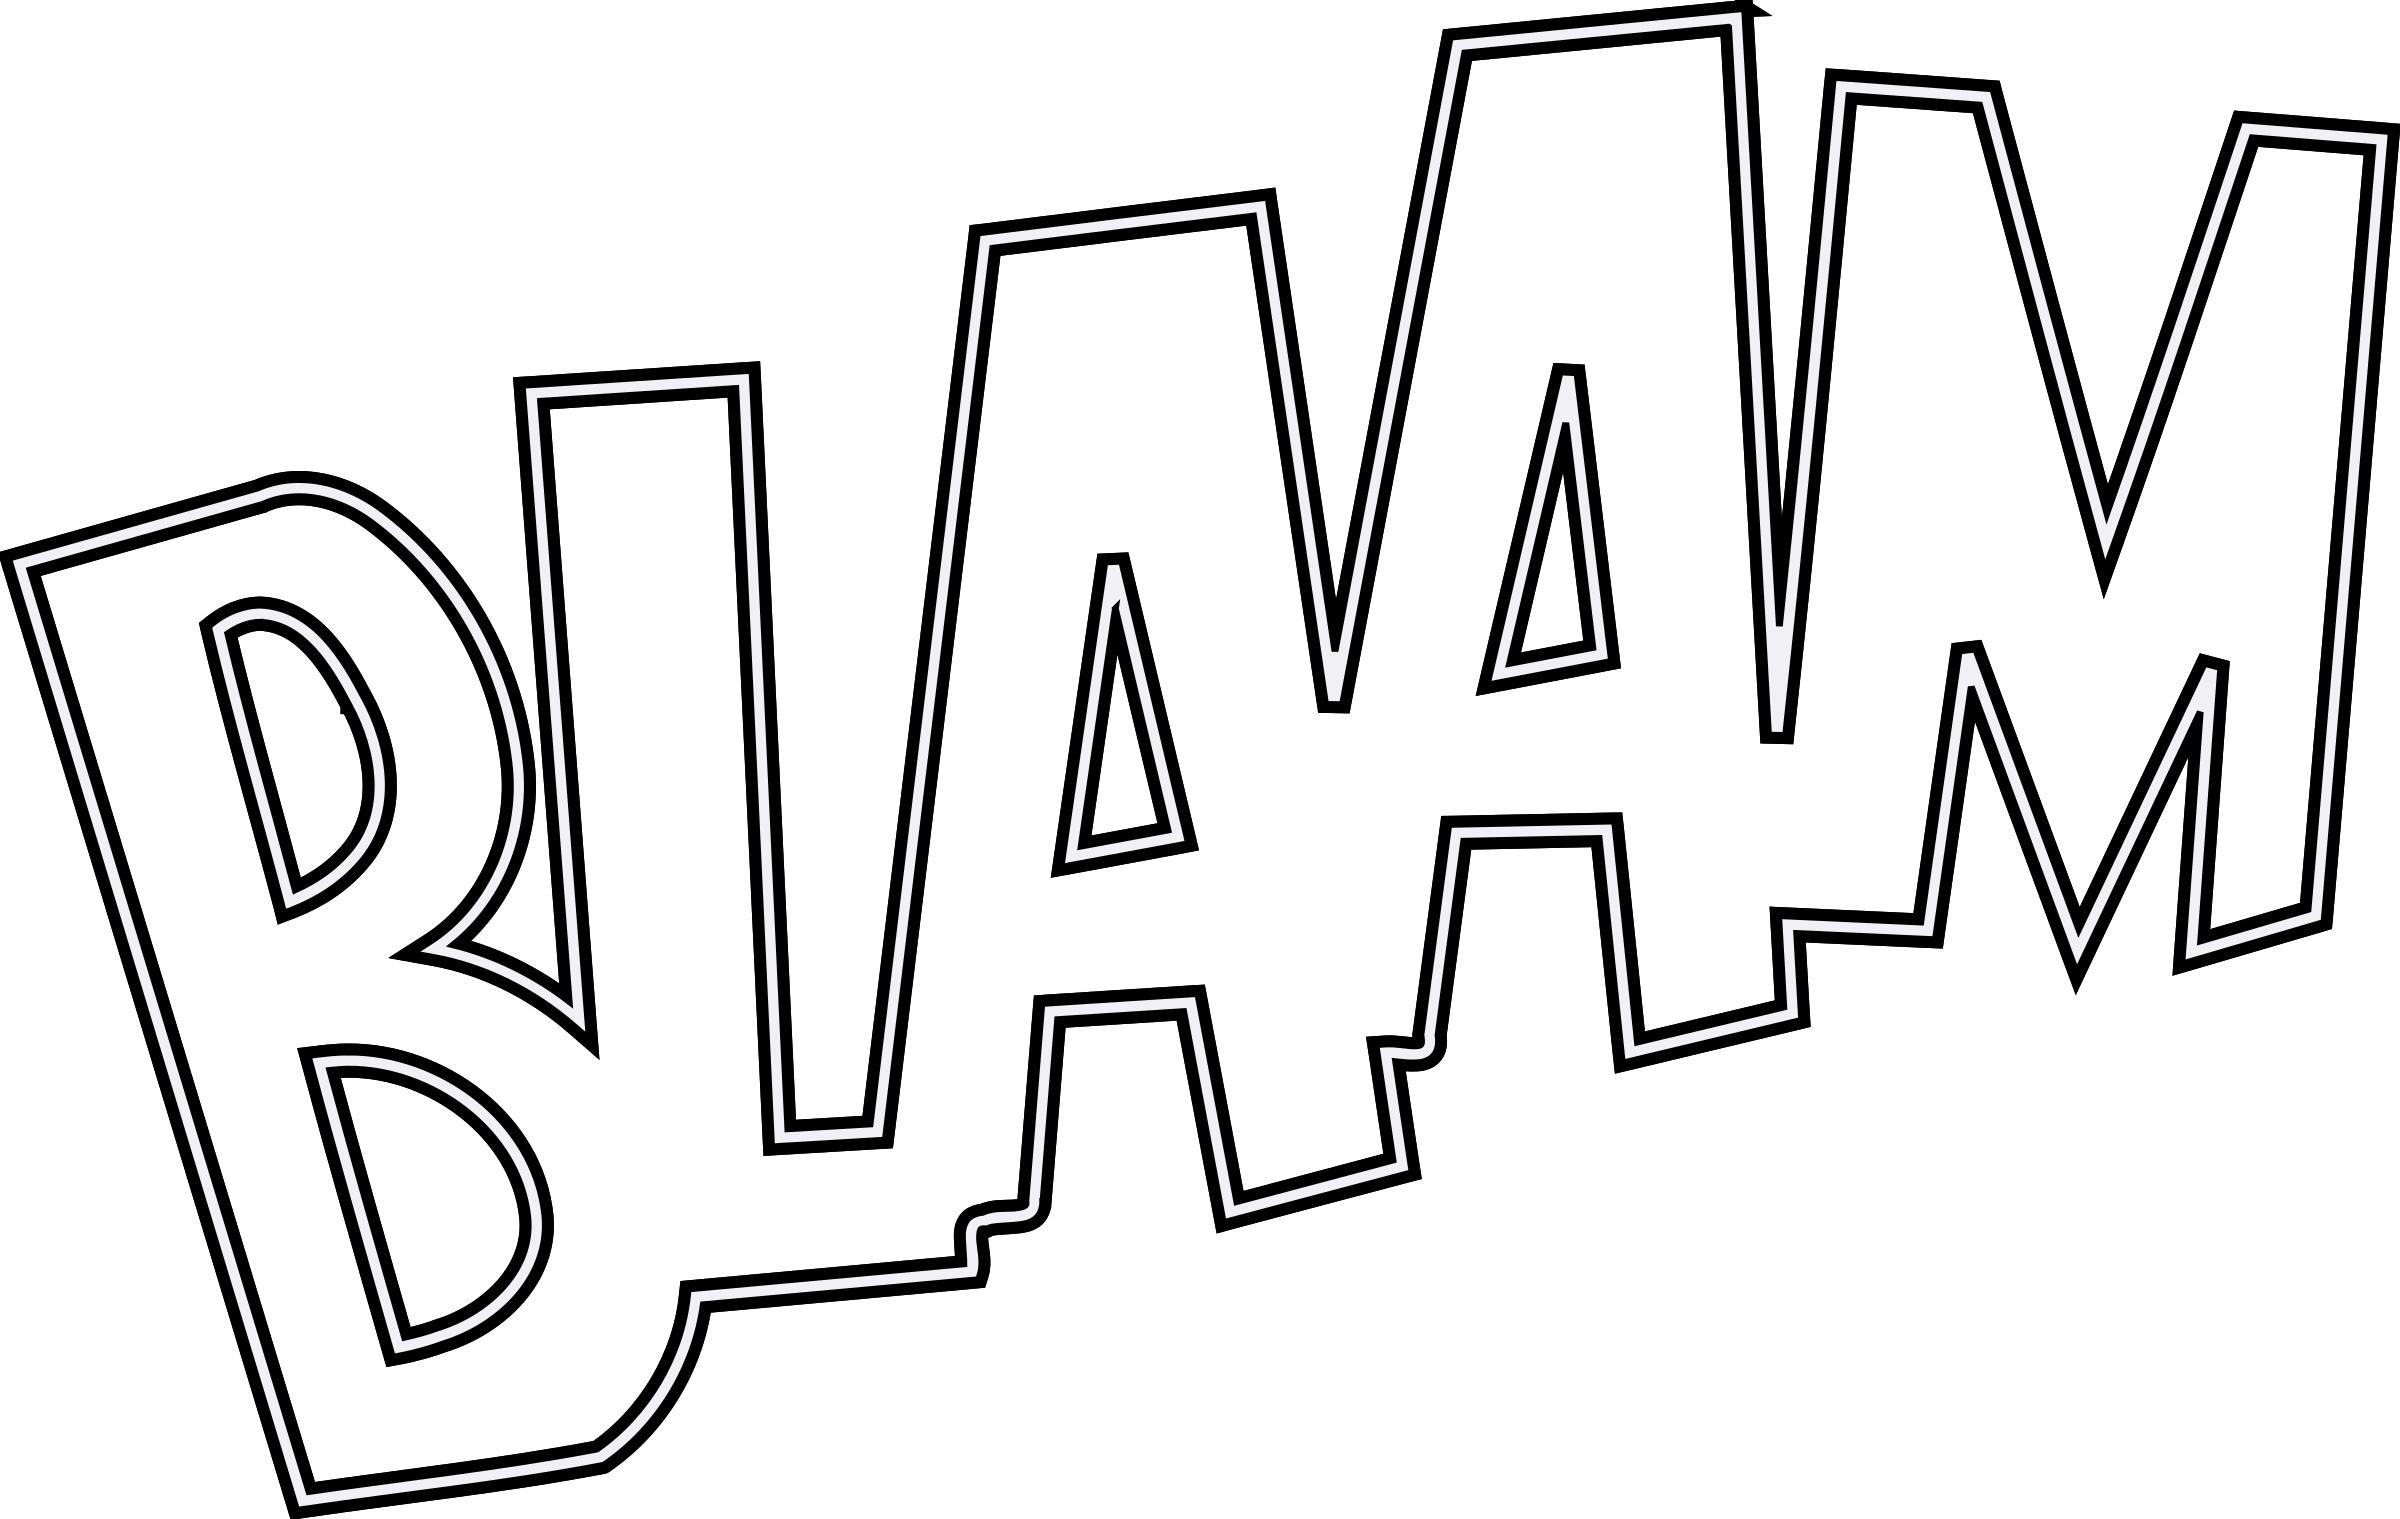 BLAAM outlined png